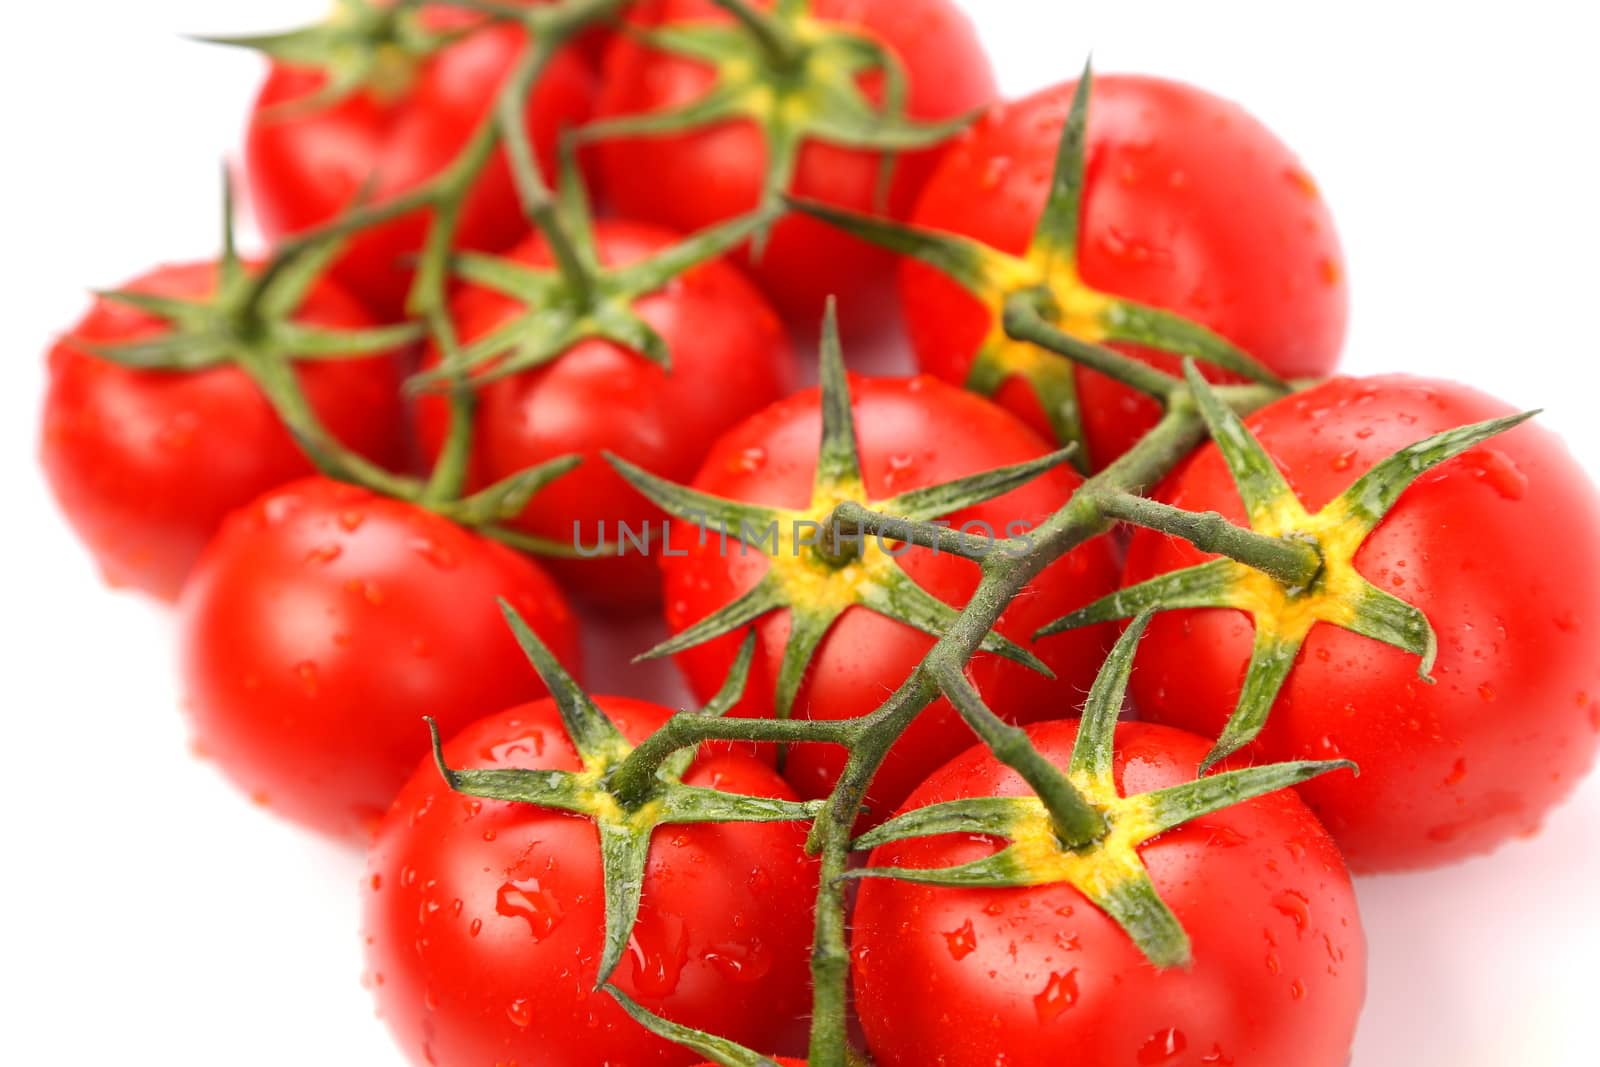 A Big Cluster of Tomatoes is located on whole background